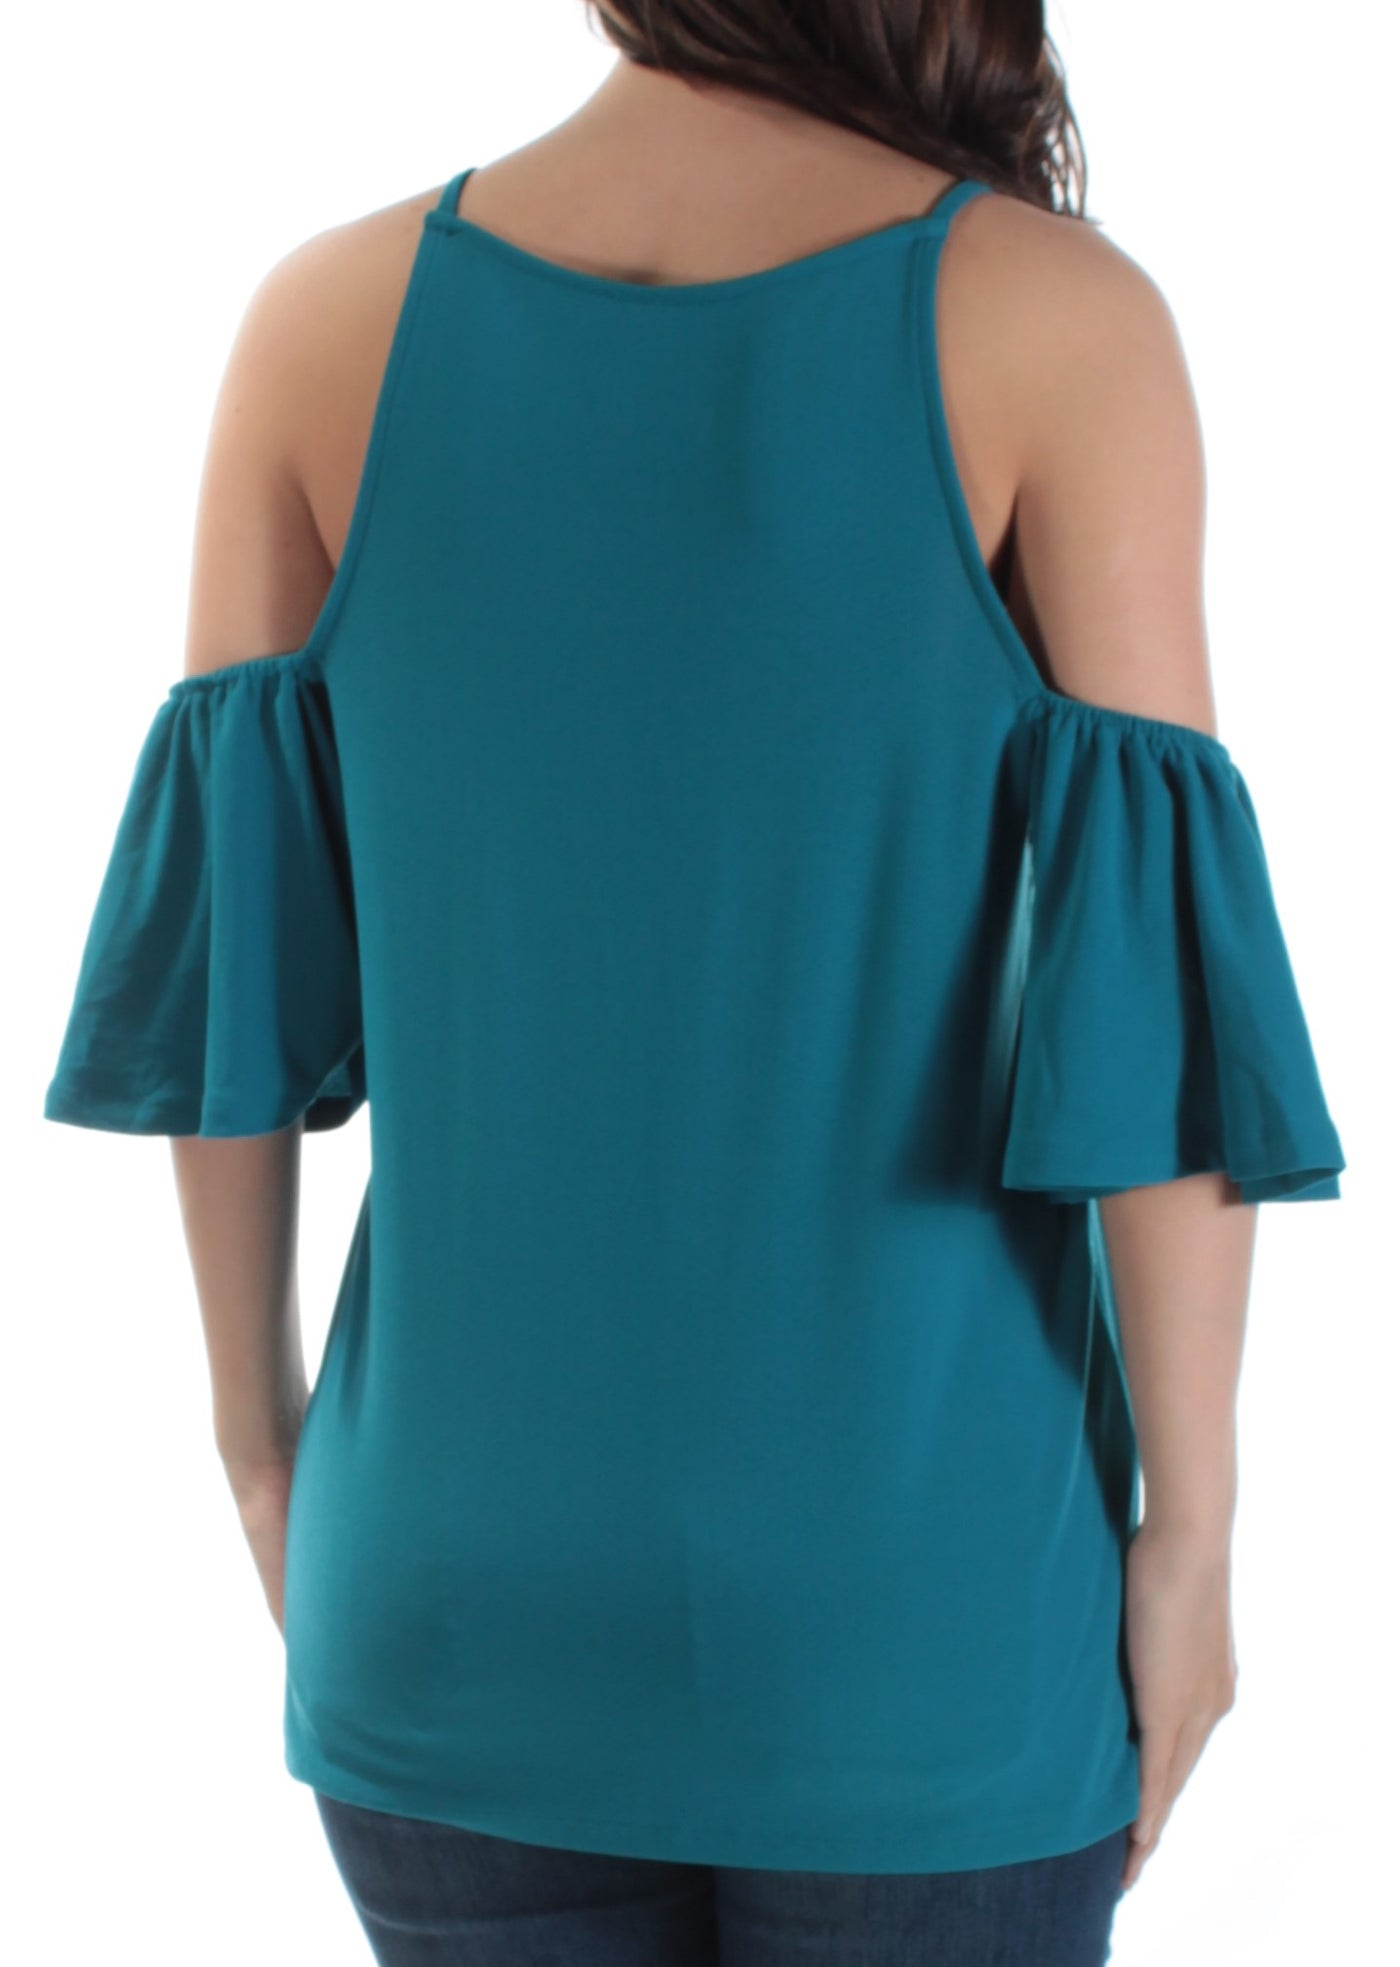 INC Womens Teal Ruffled Cut Out Short Sleeve Jewel Neck Top